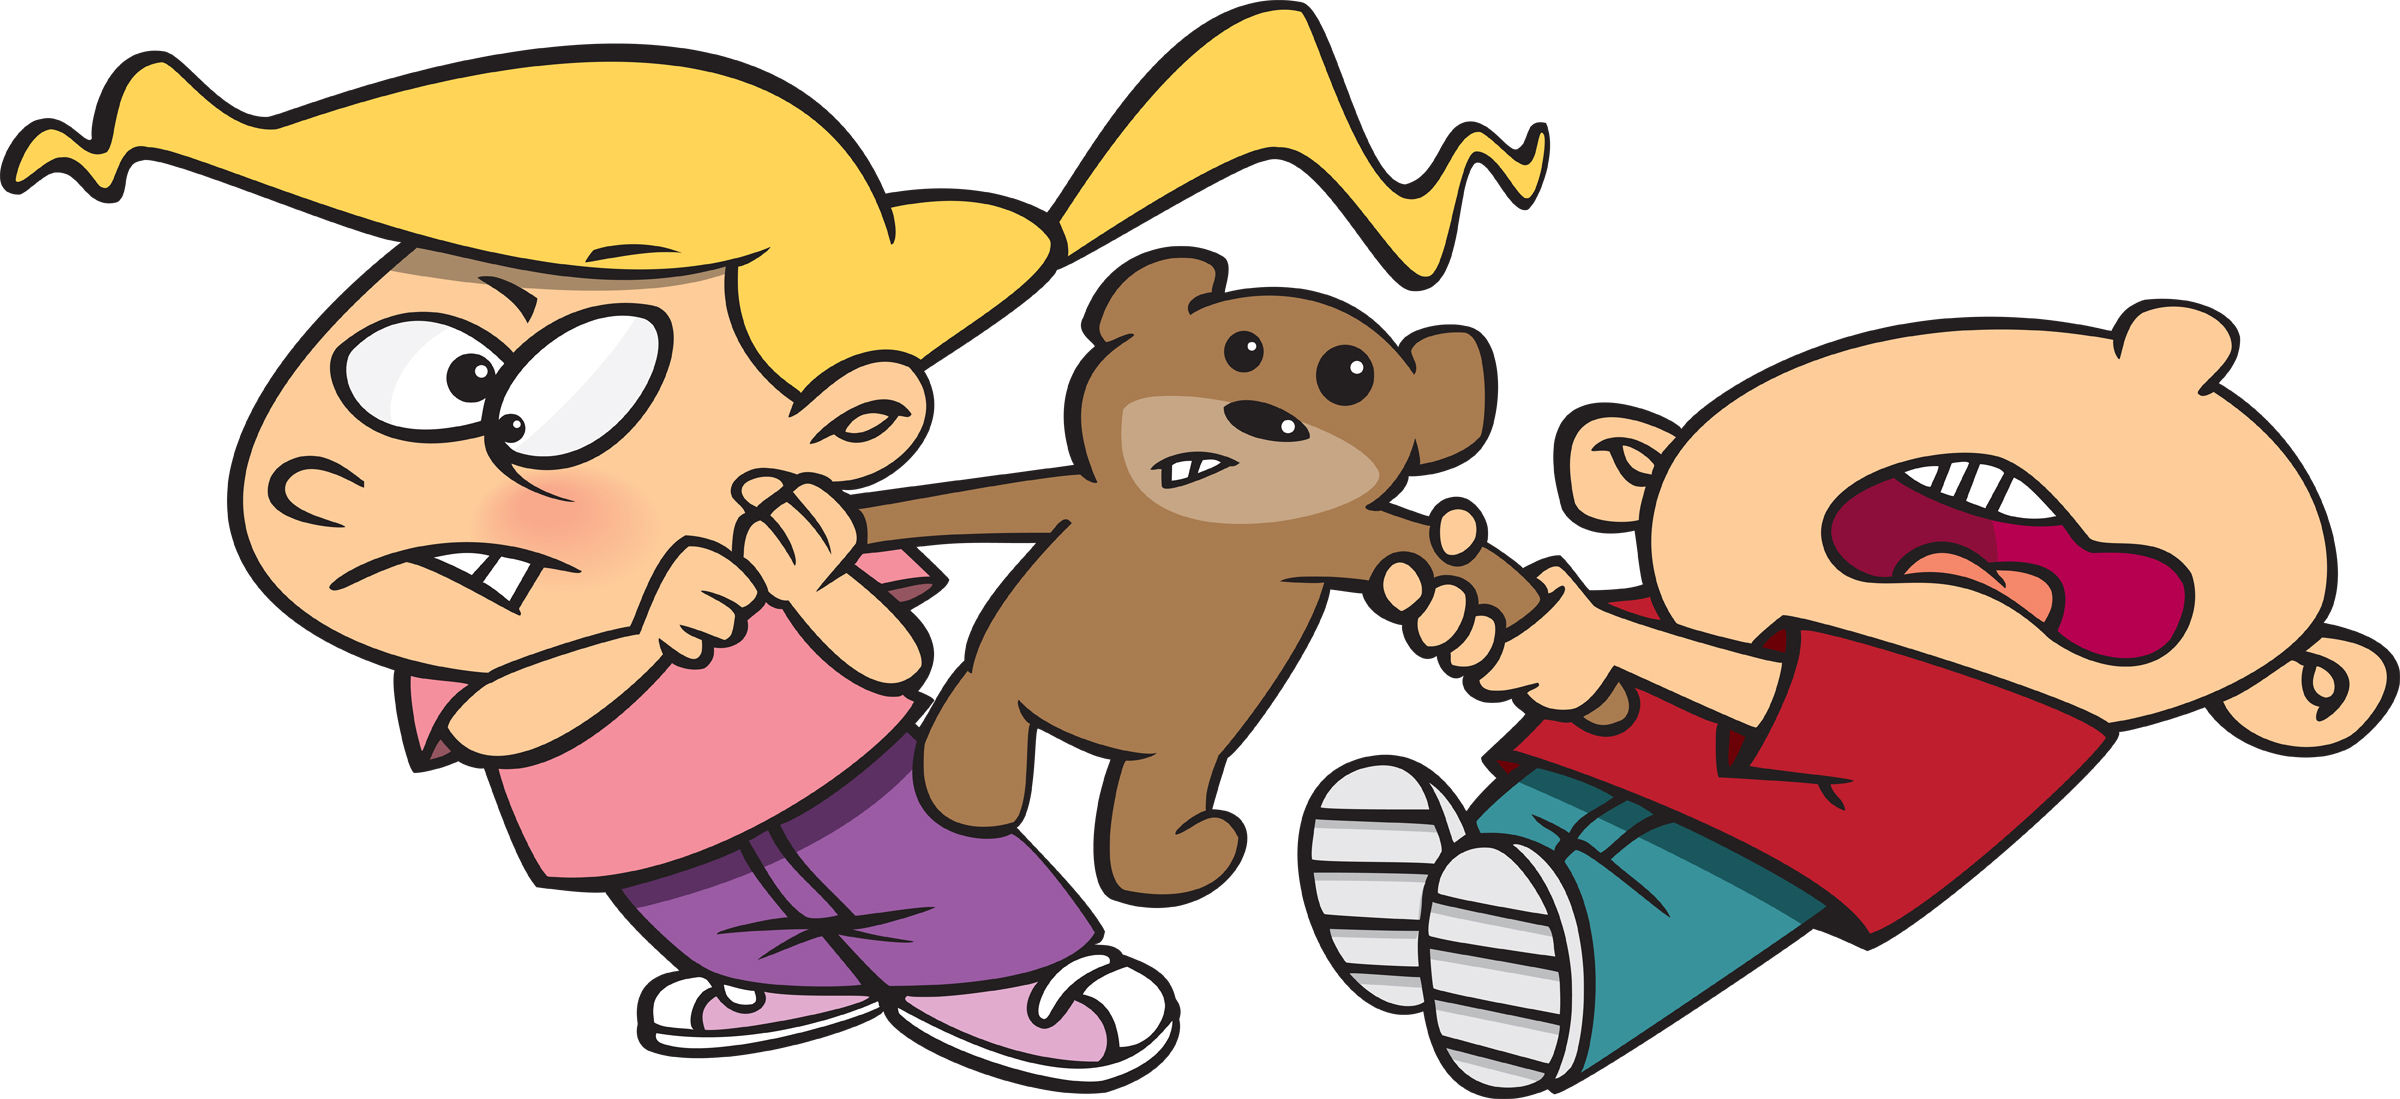 kids sharing toys clipart photo image